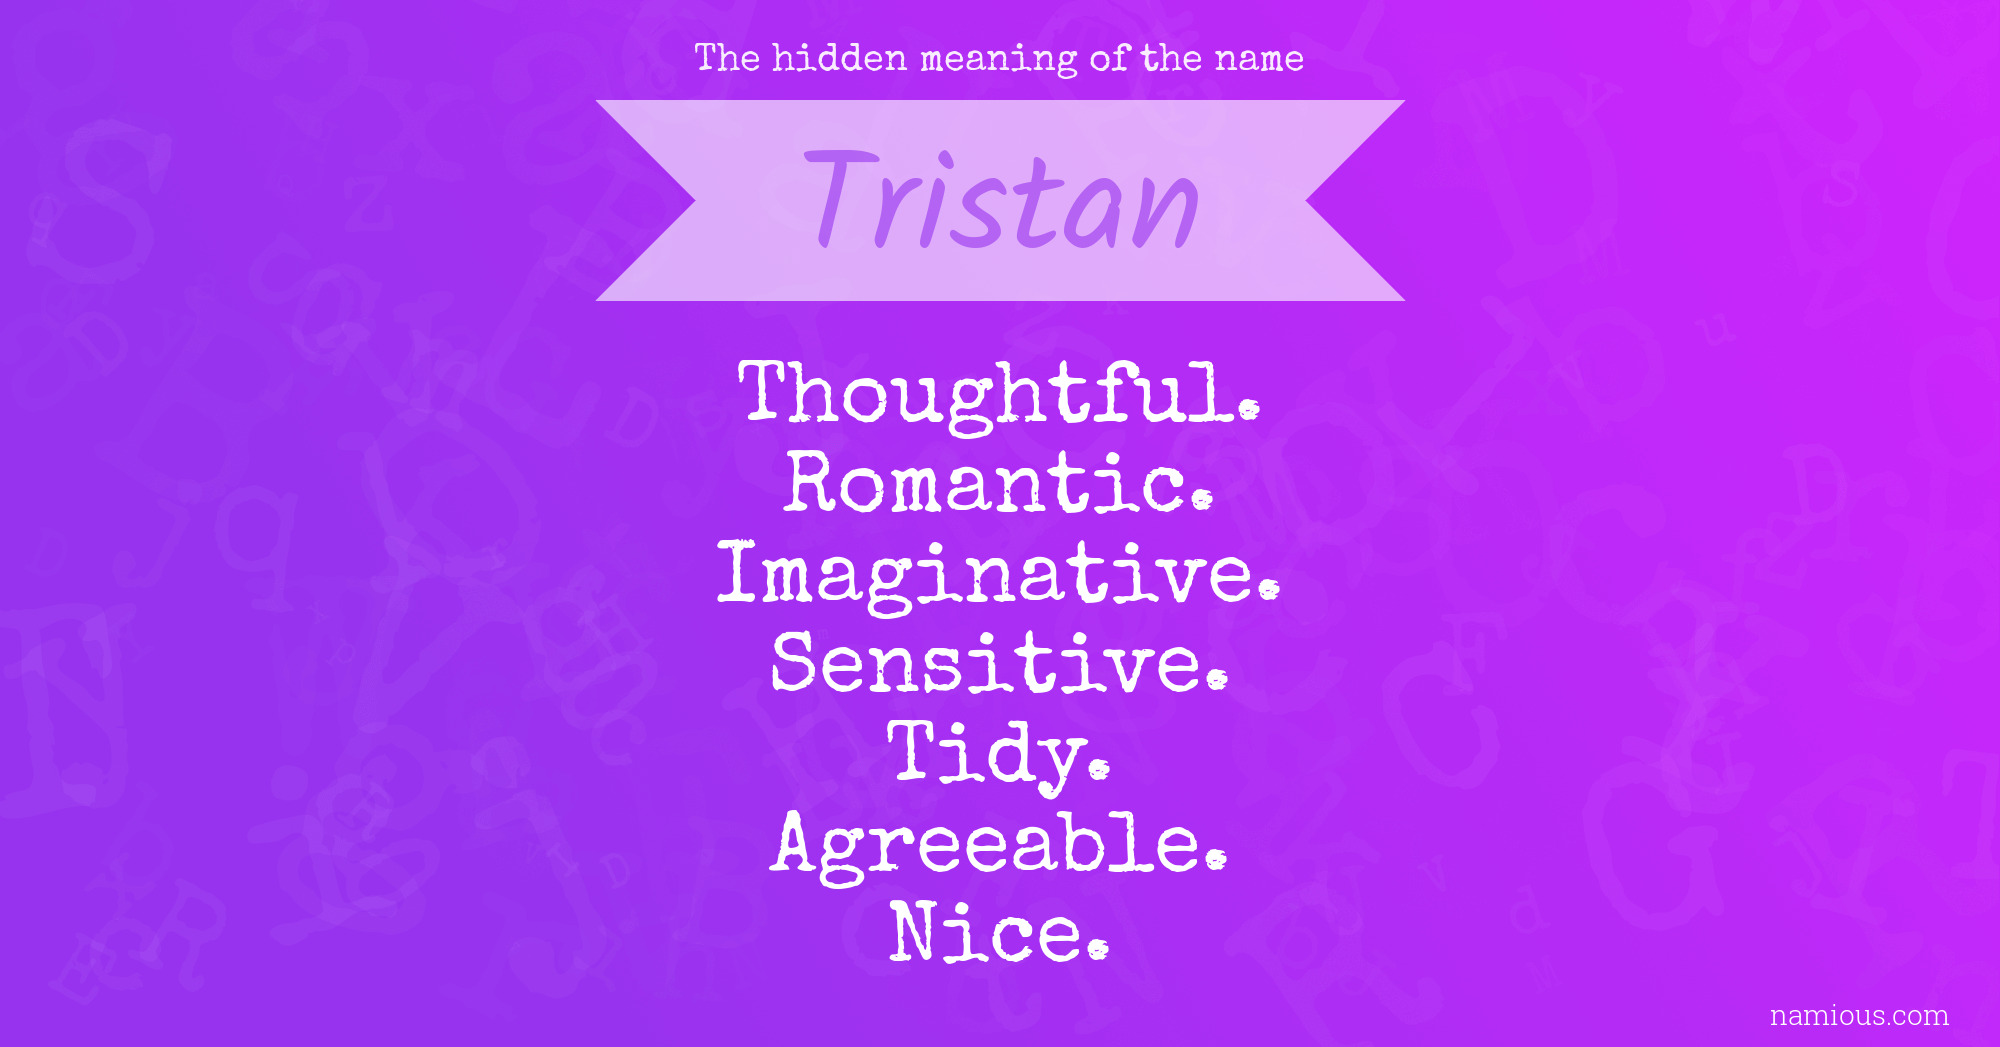 The hidden meaning of the name Tristan